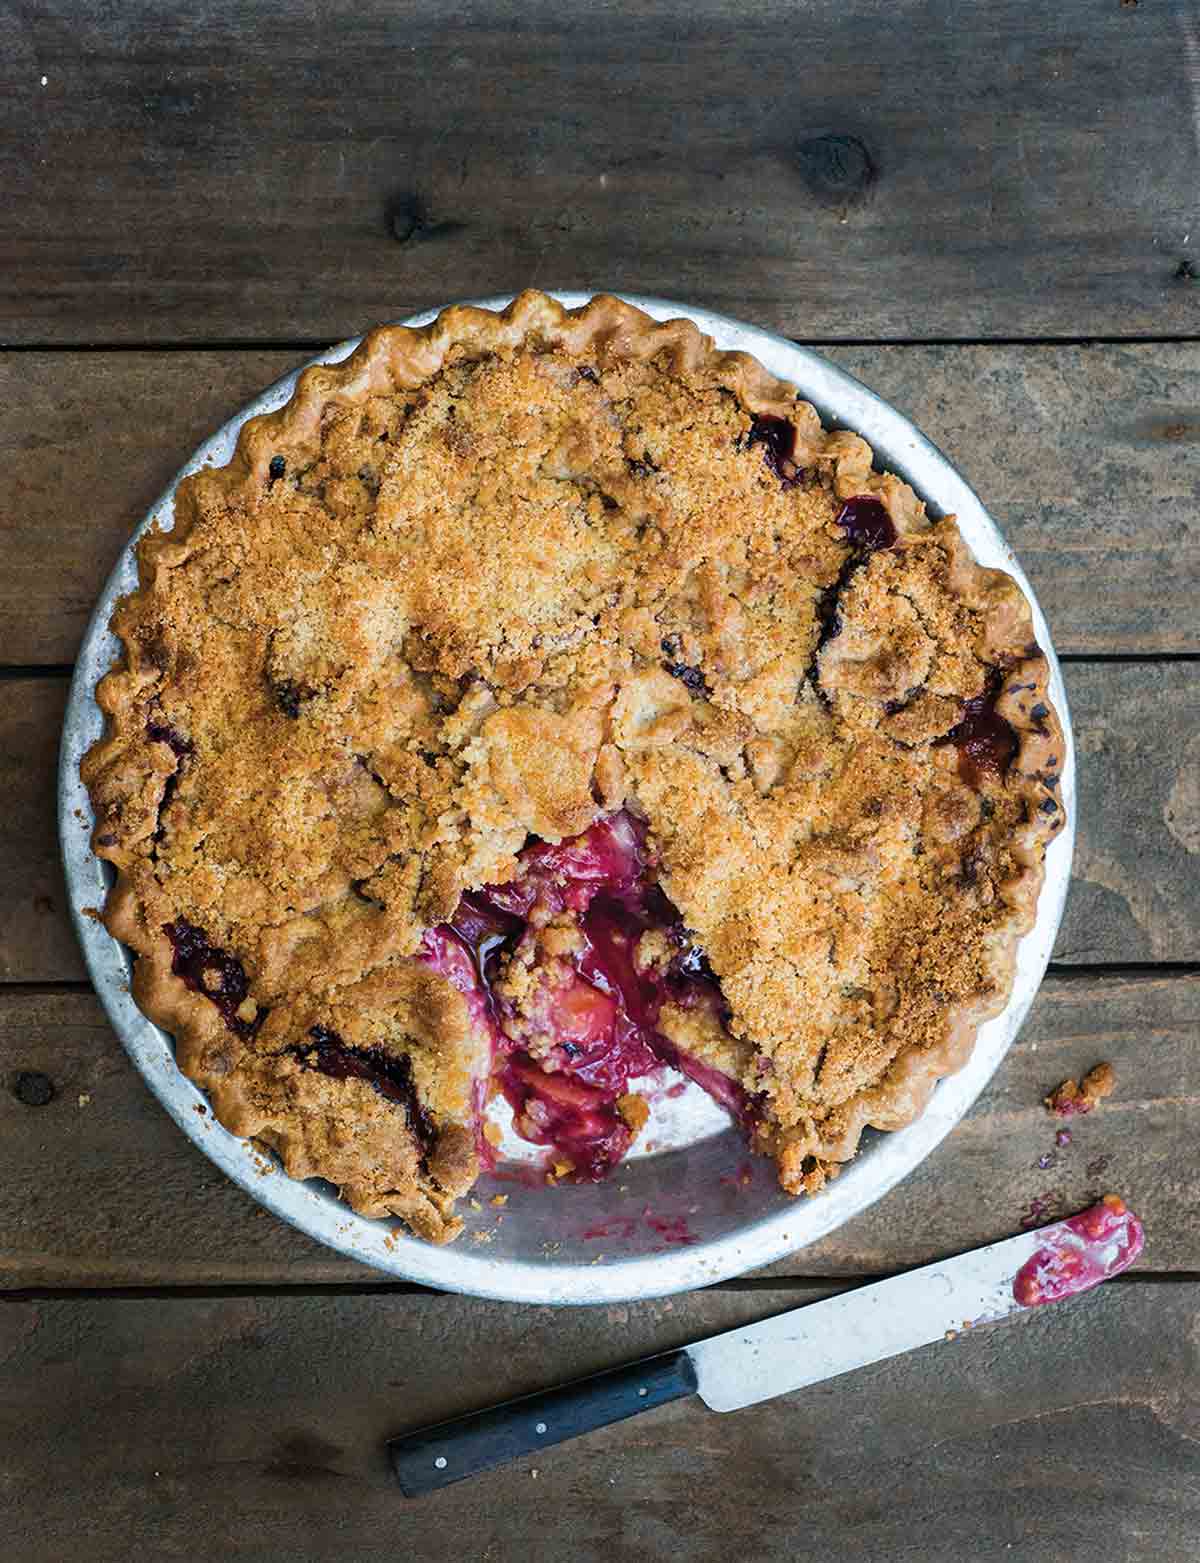 A baked plum crumble pie with a serving cut from it and a knife on the table beside it.